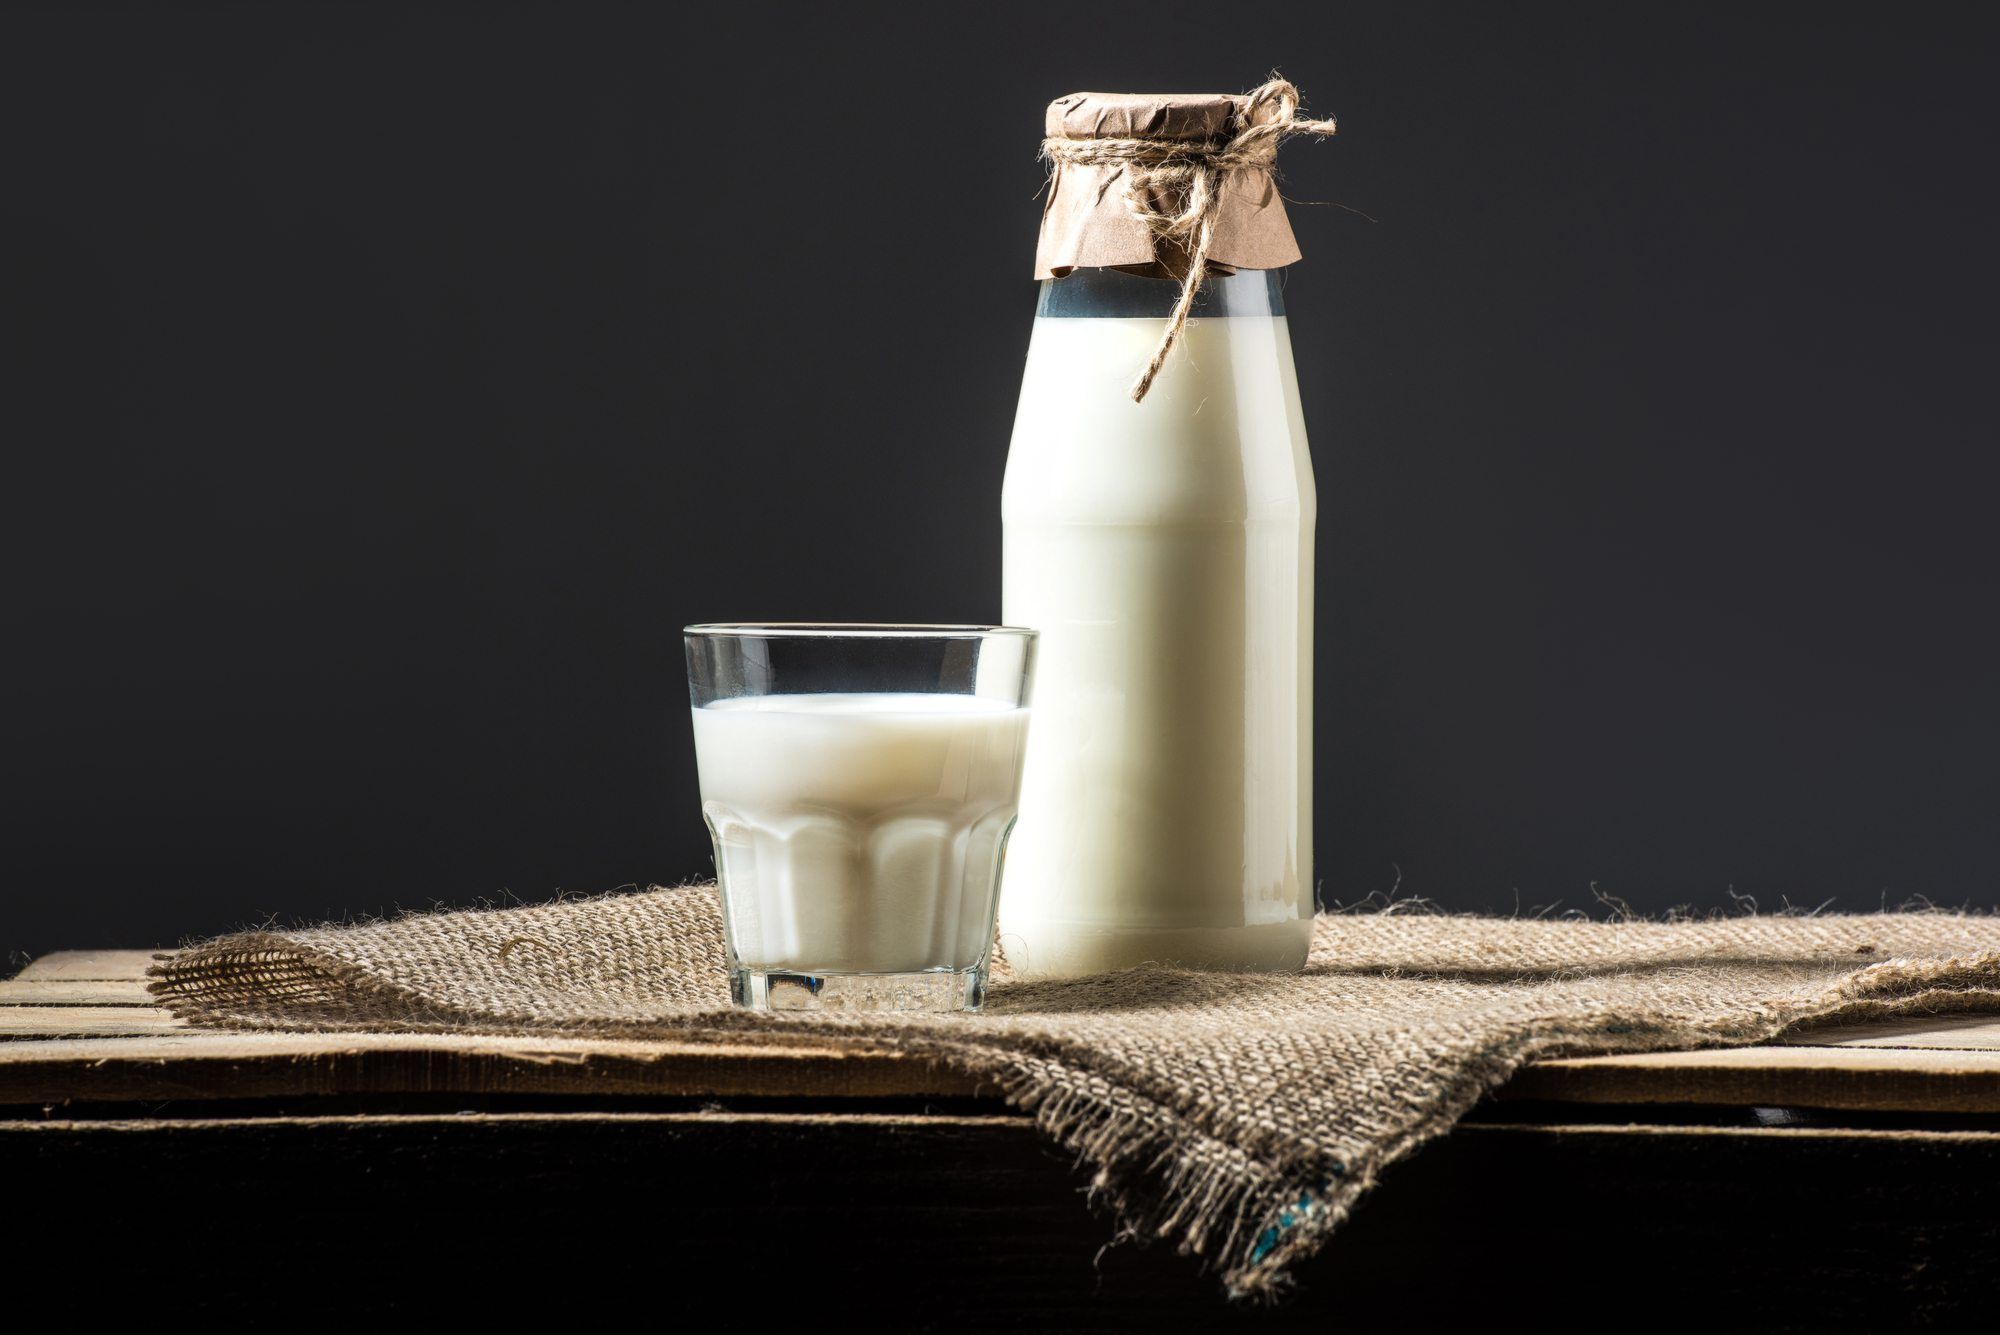 Dungeness Valley Creamery has issued a voluntary recall of all of its all raw milk products